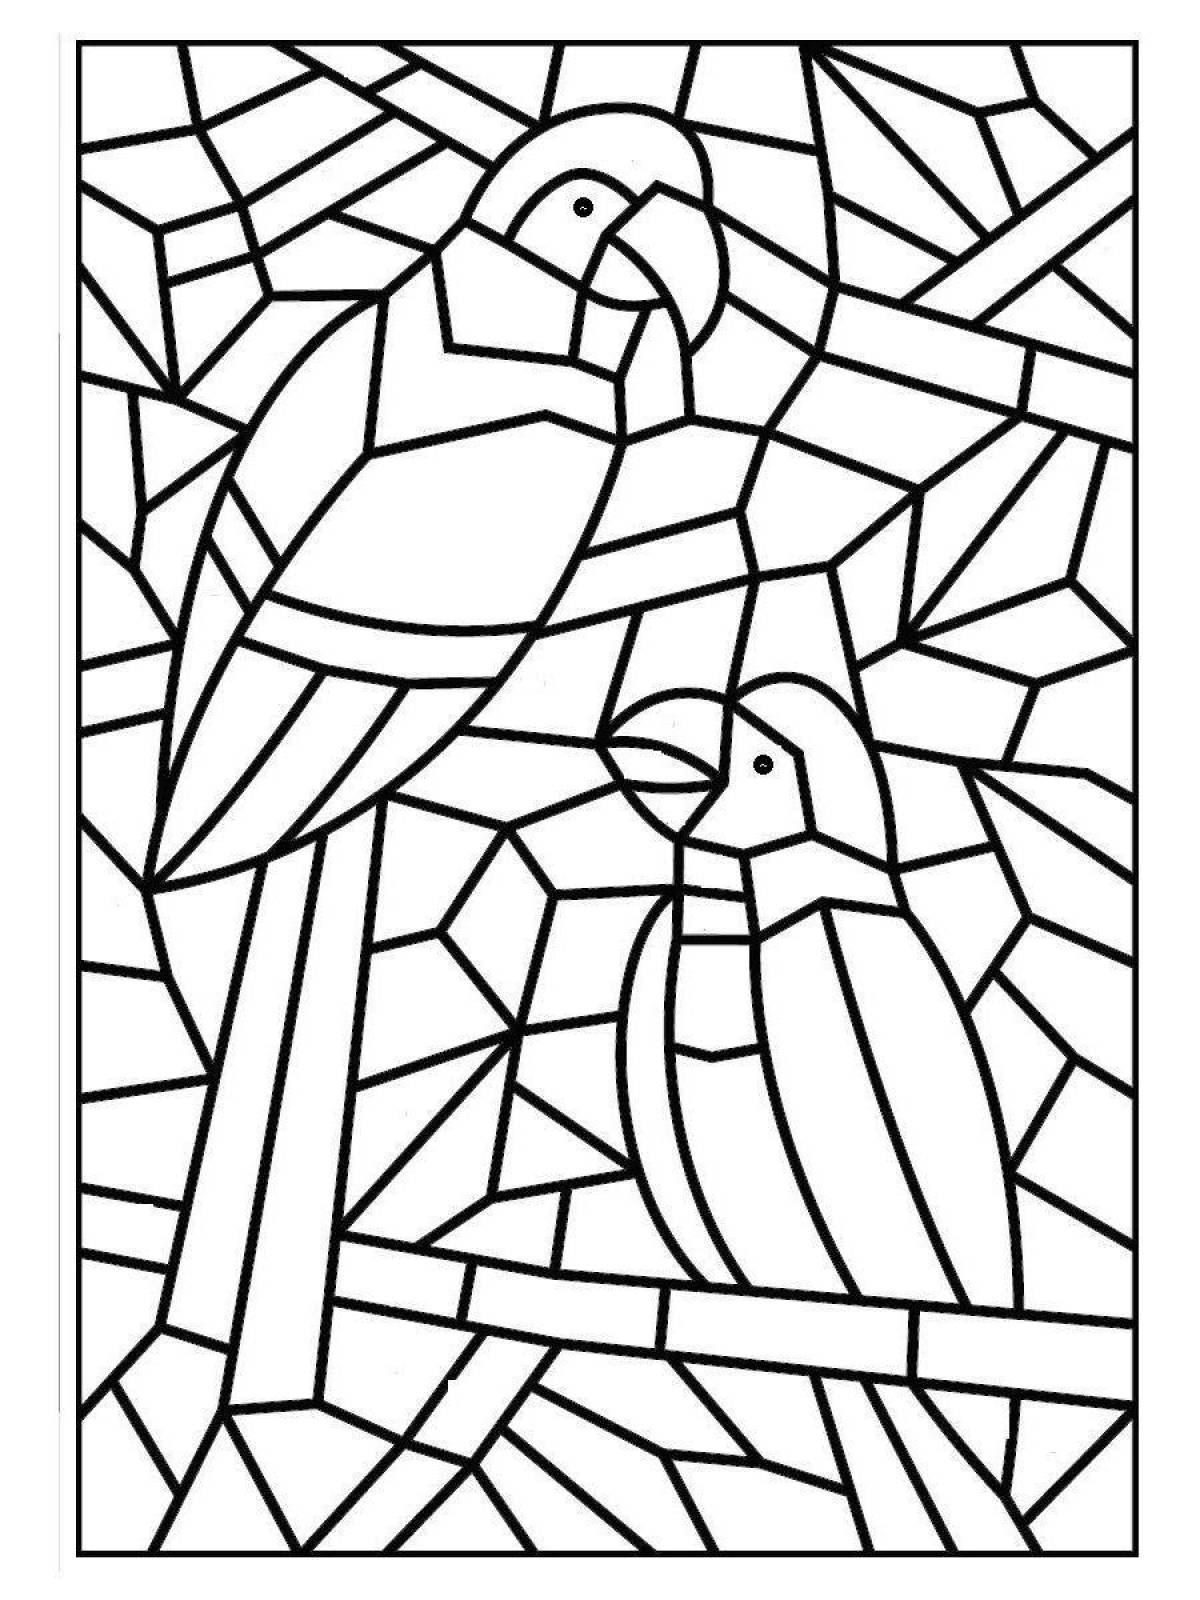 Bright mosaic coloring book for kids